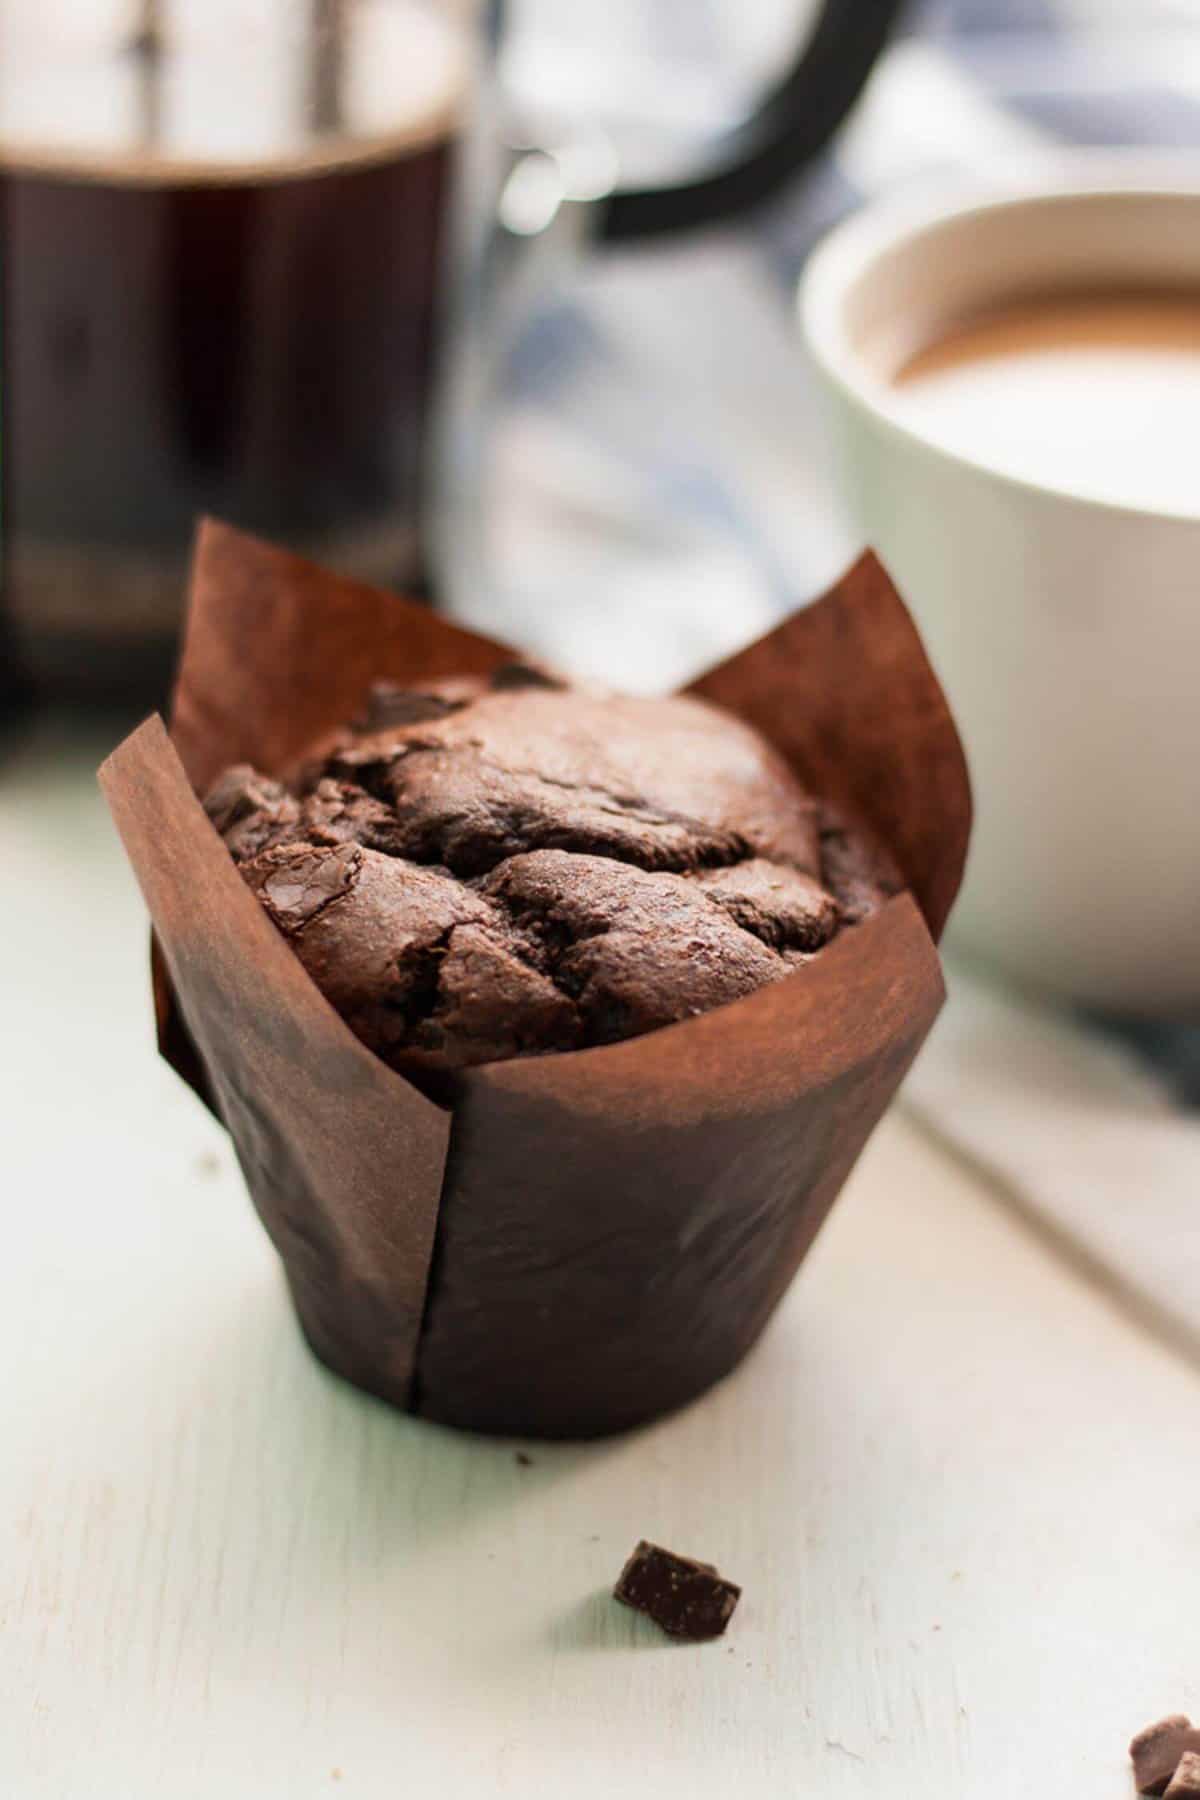 A cup of coffee behind a single chocolate chip muffin in a tulip case.